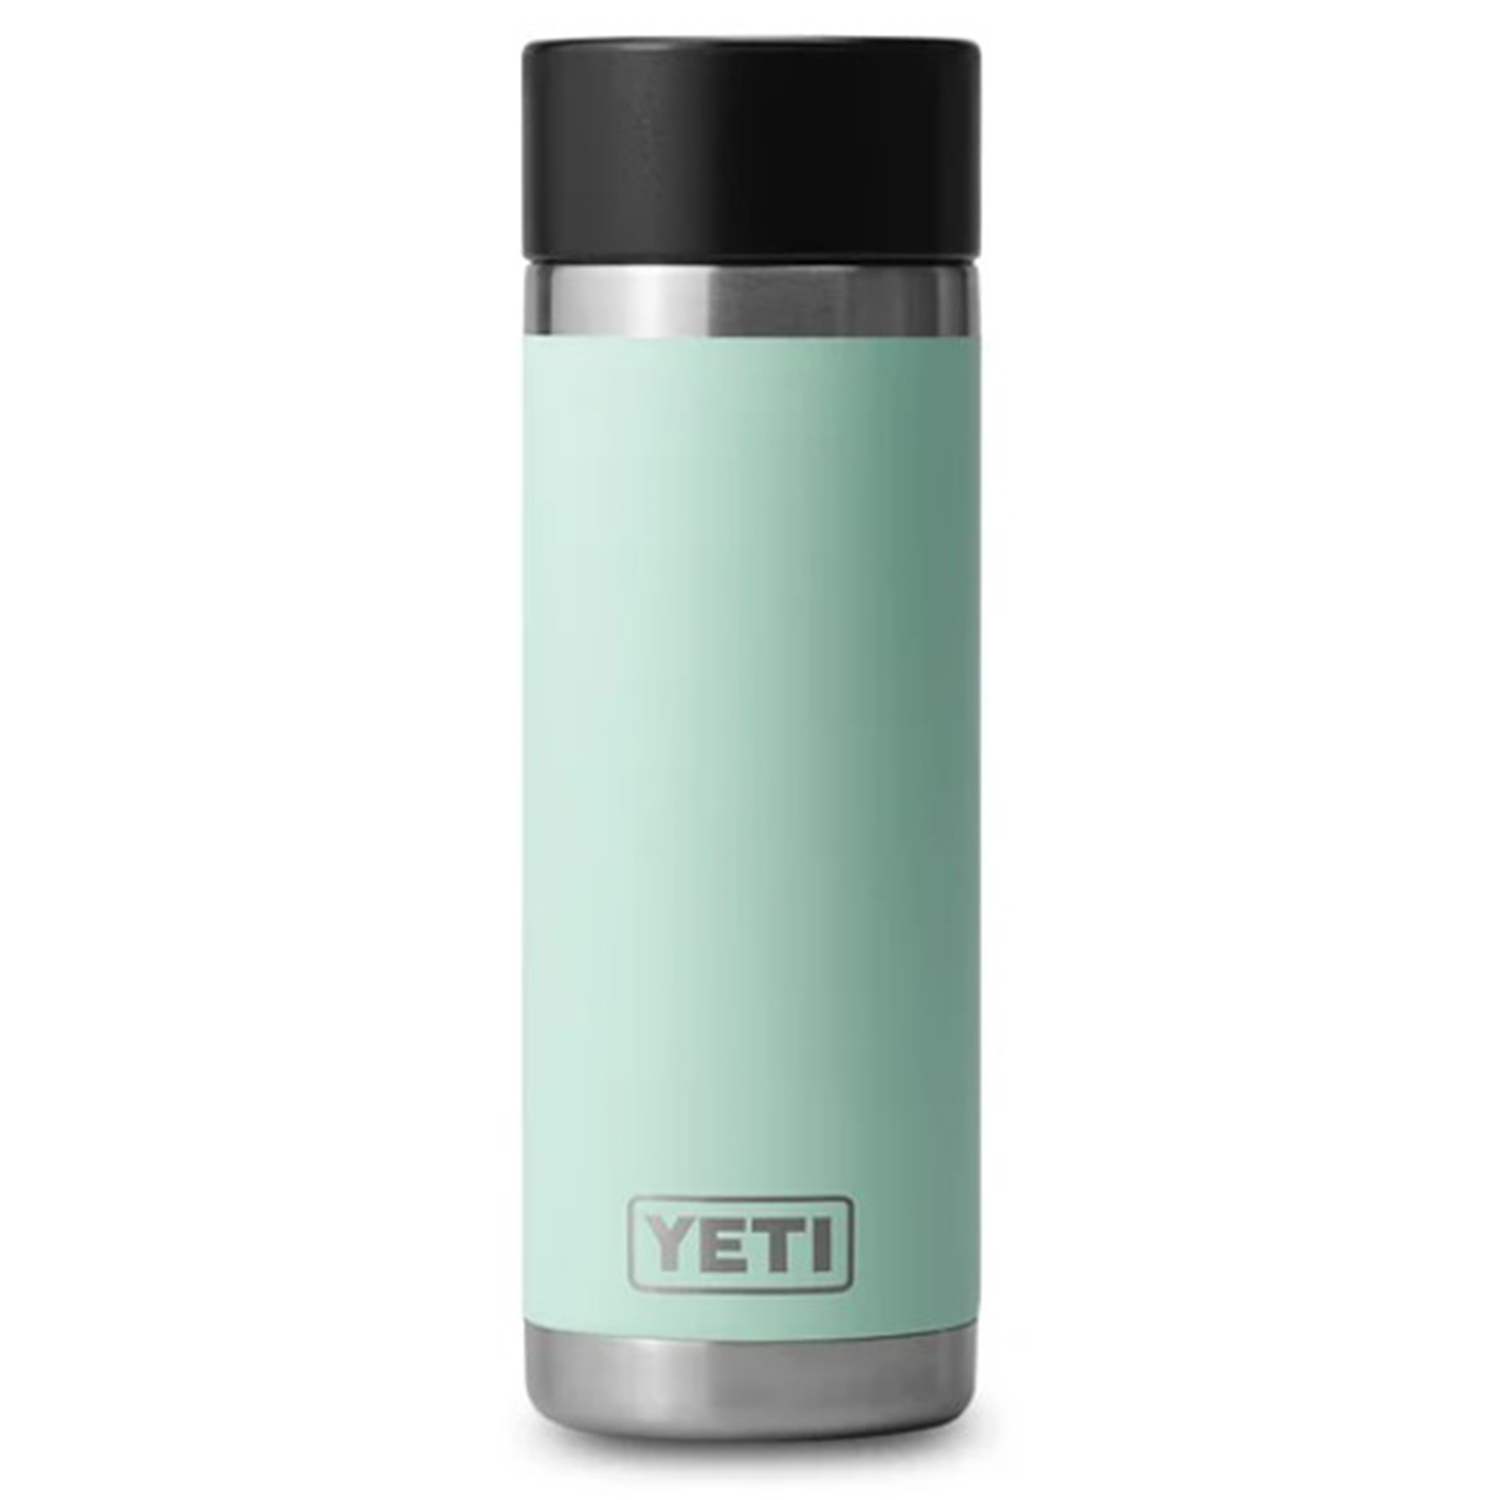 New Milford Hardware - New product alert!!! Yeti camo 18 ounce